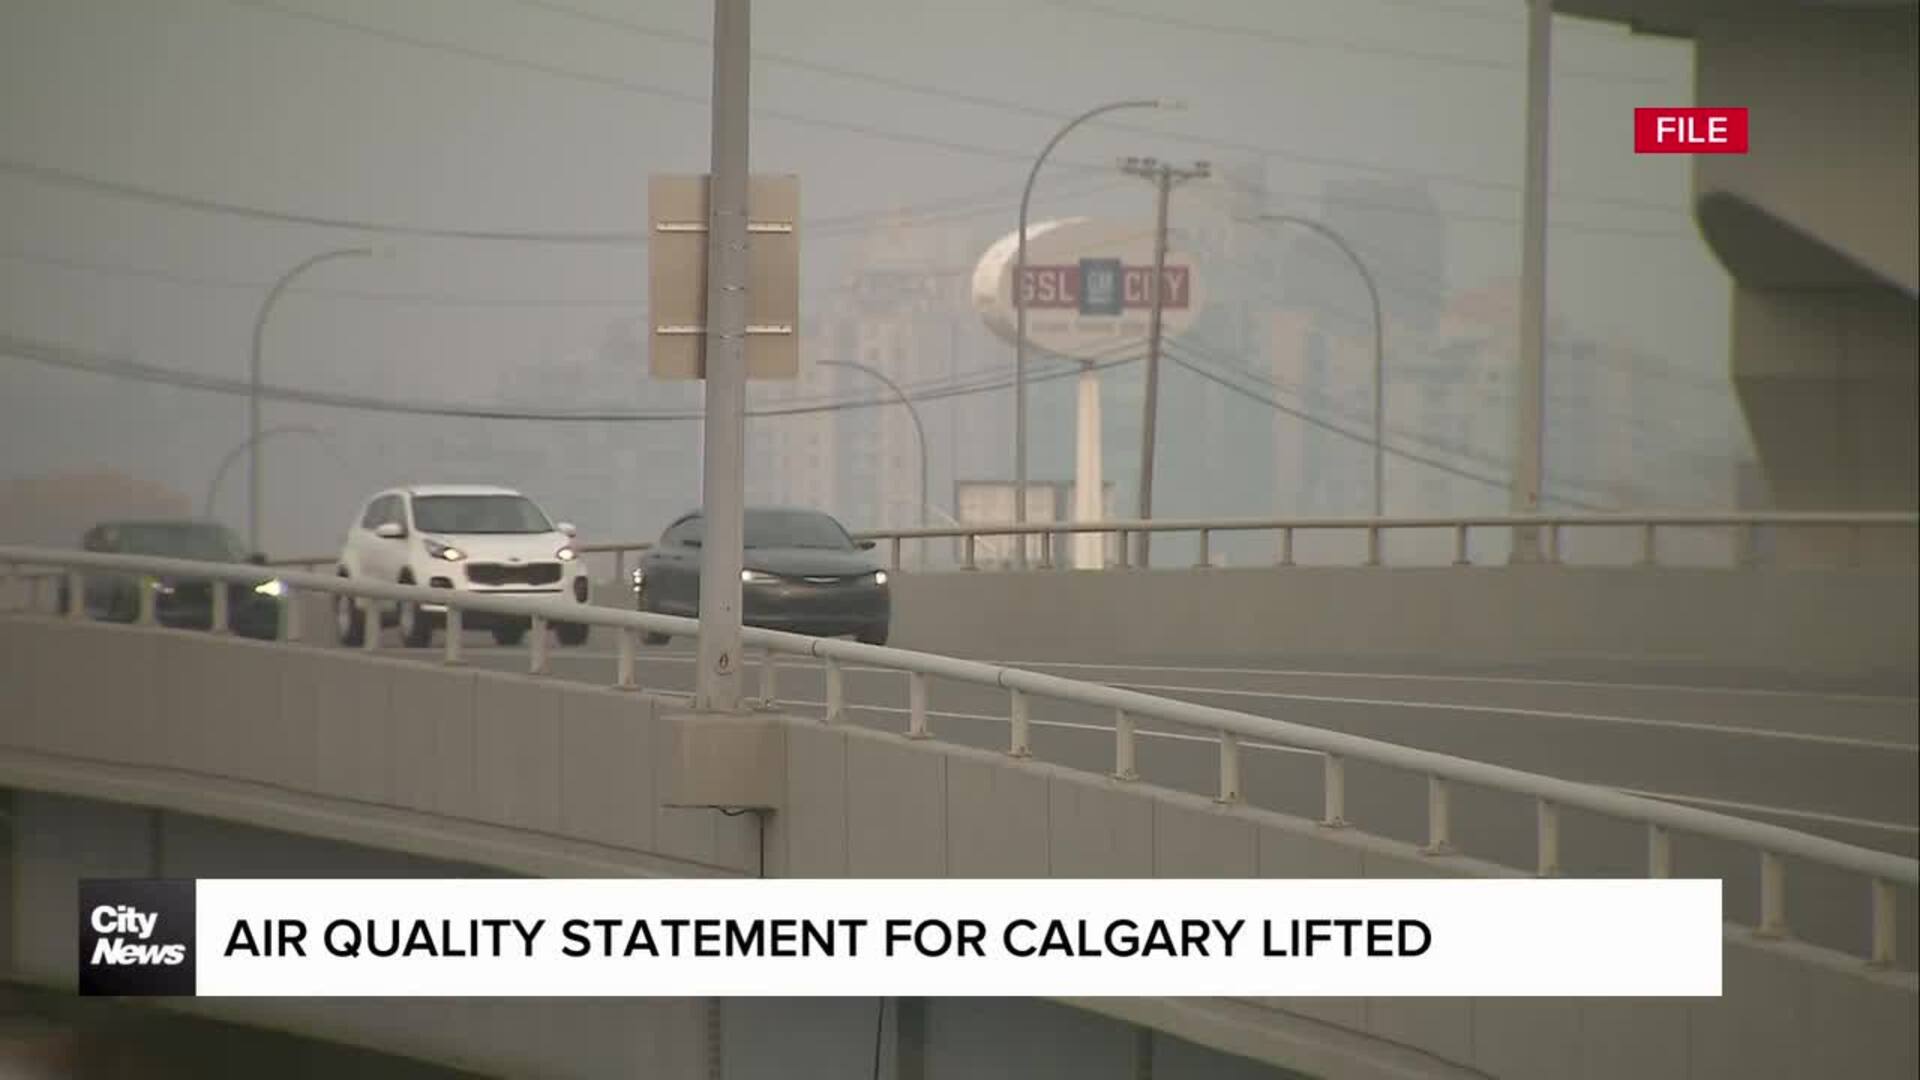 Air quality statement for Calgary lifted